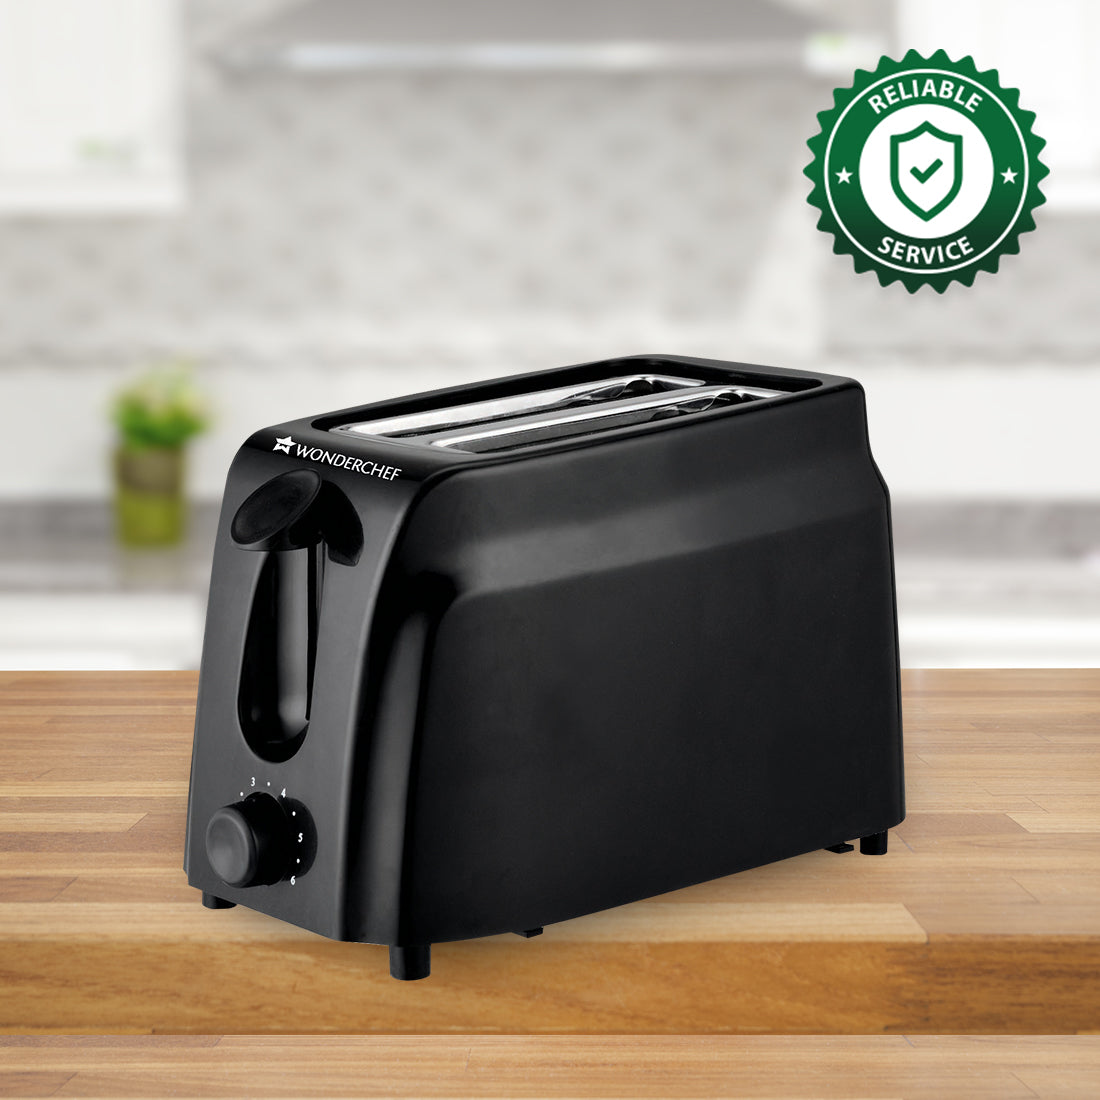 Acura Plus Pop Up Slice Toaster, 750W, 7 Browning Controls, Removable Crumb Tray, 2 Years Warranty, Black